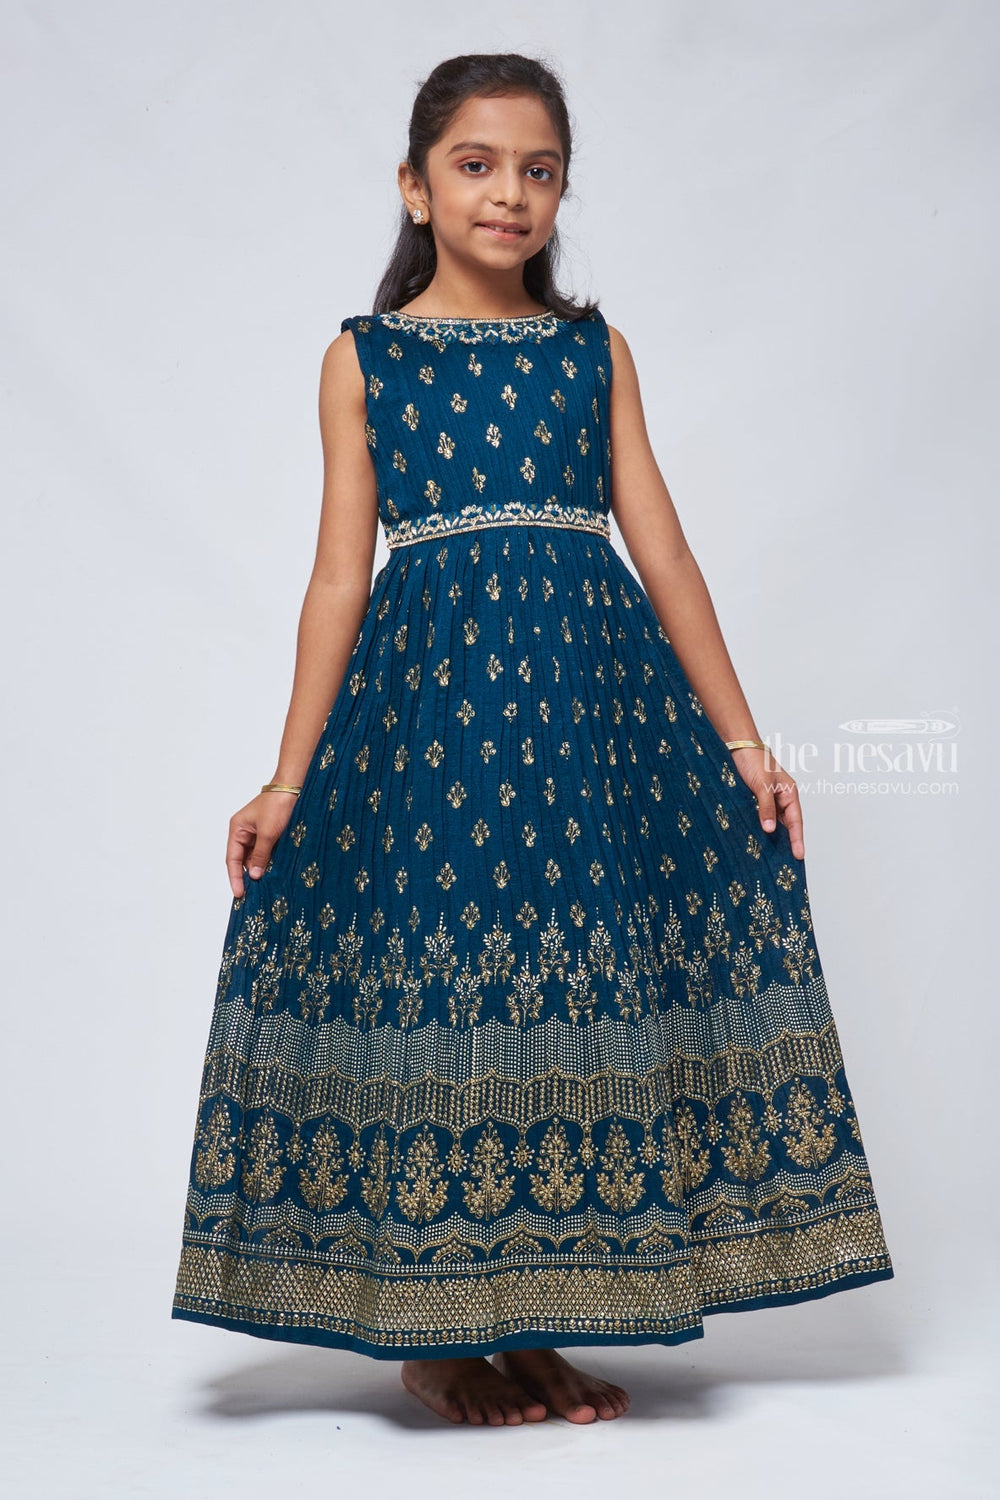 The Nesavu Silk Gown Childrens Floral Anarkali Emerald Elegance with Rhine Stones Embroidery - Traditional Ethnic Gown for Girls Nesavu Long Anarkali For Girls | Little Girl Anarkali Outfit | The Nesavu